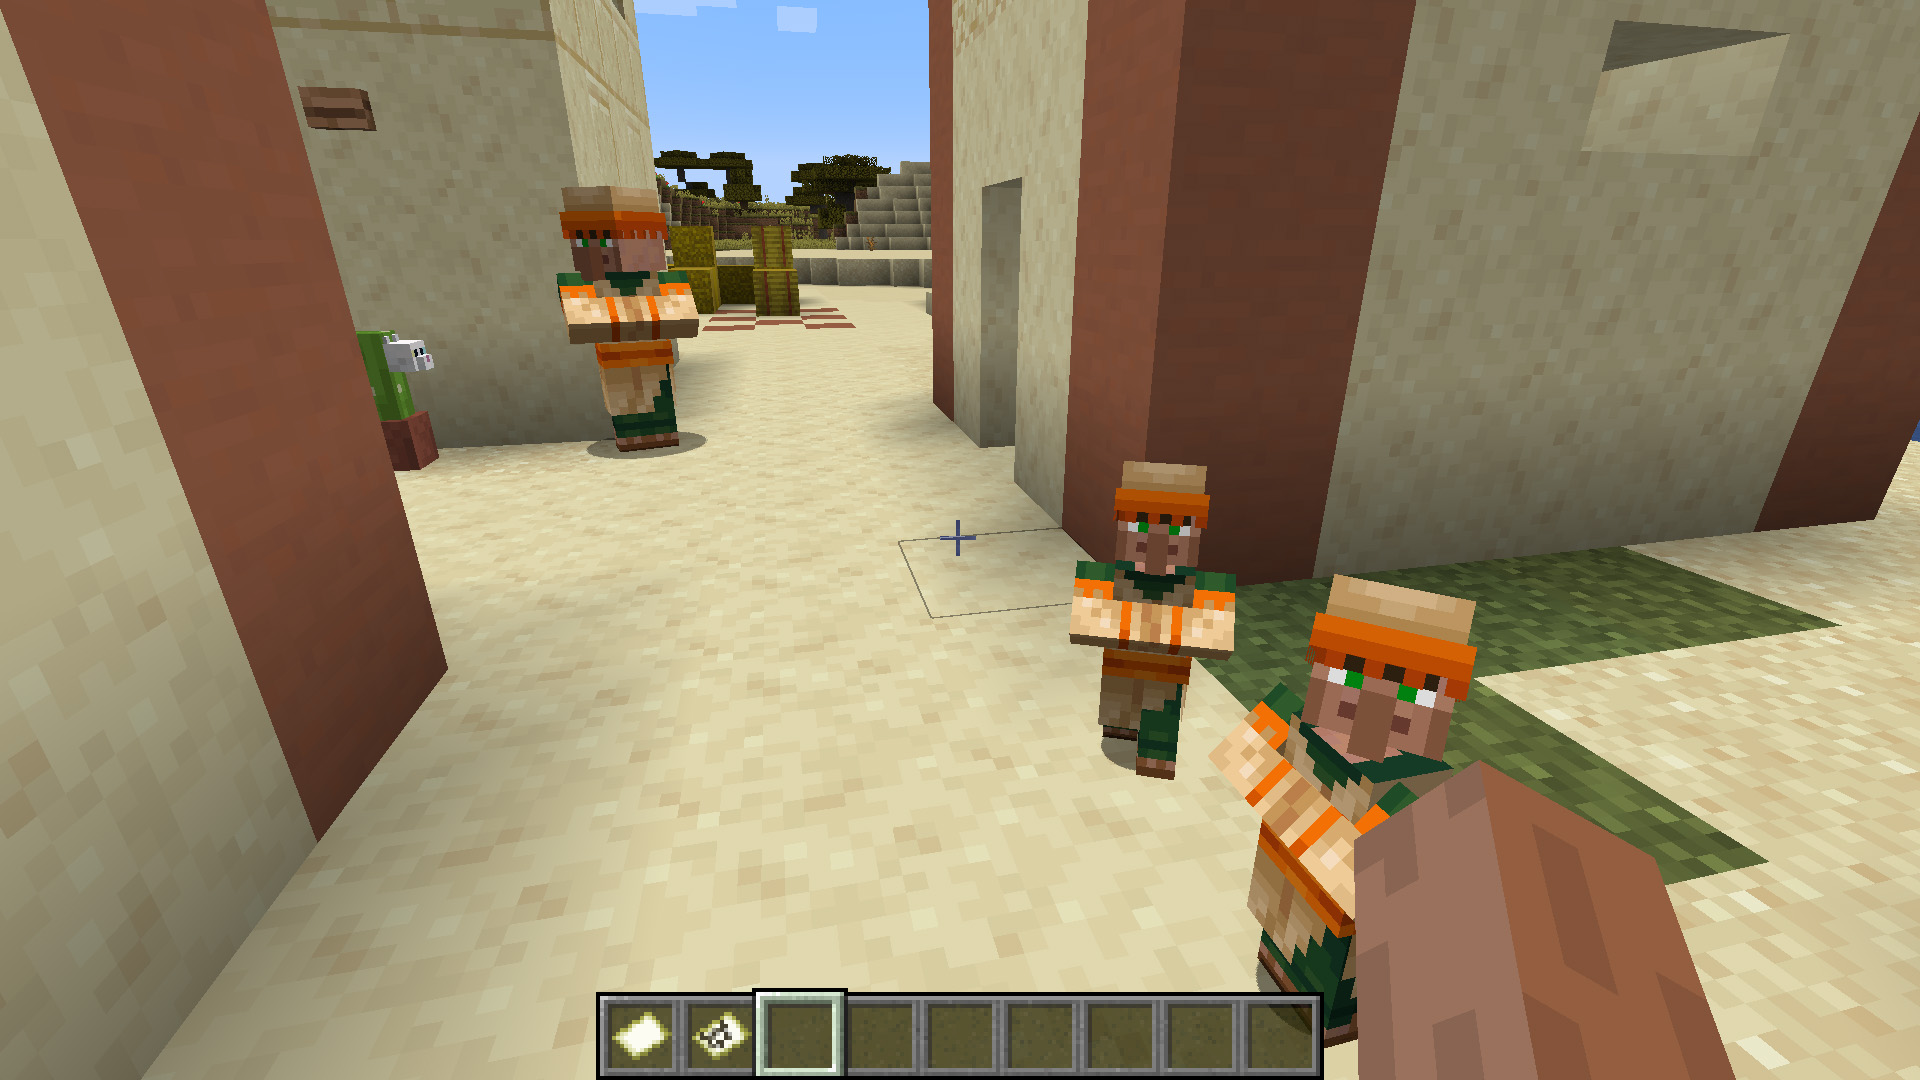 Minecraft breed villager - Two baby villagers stand outside a house in a desert village.